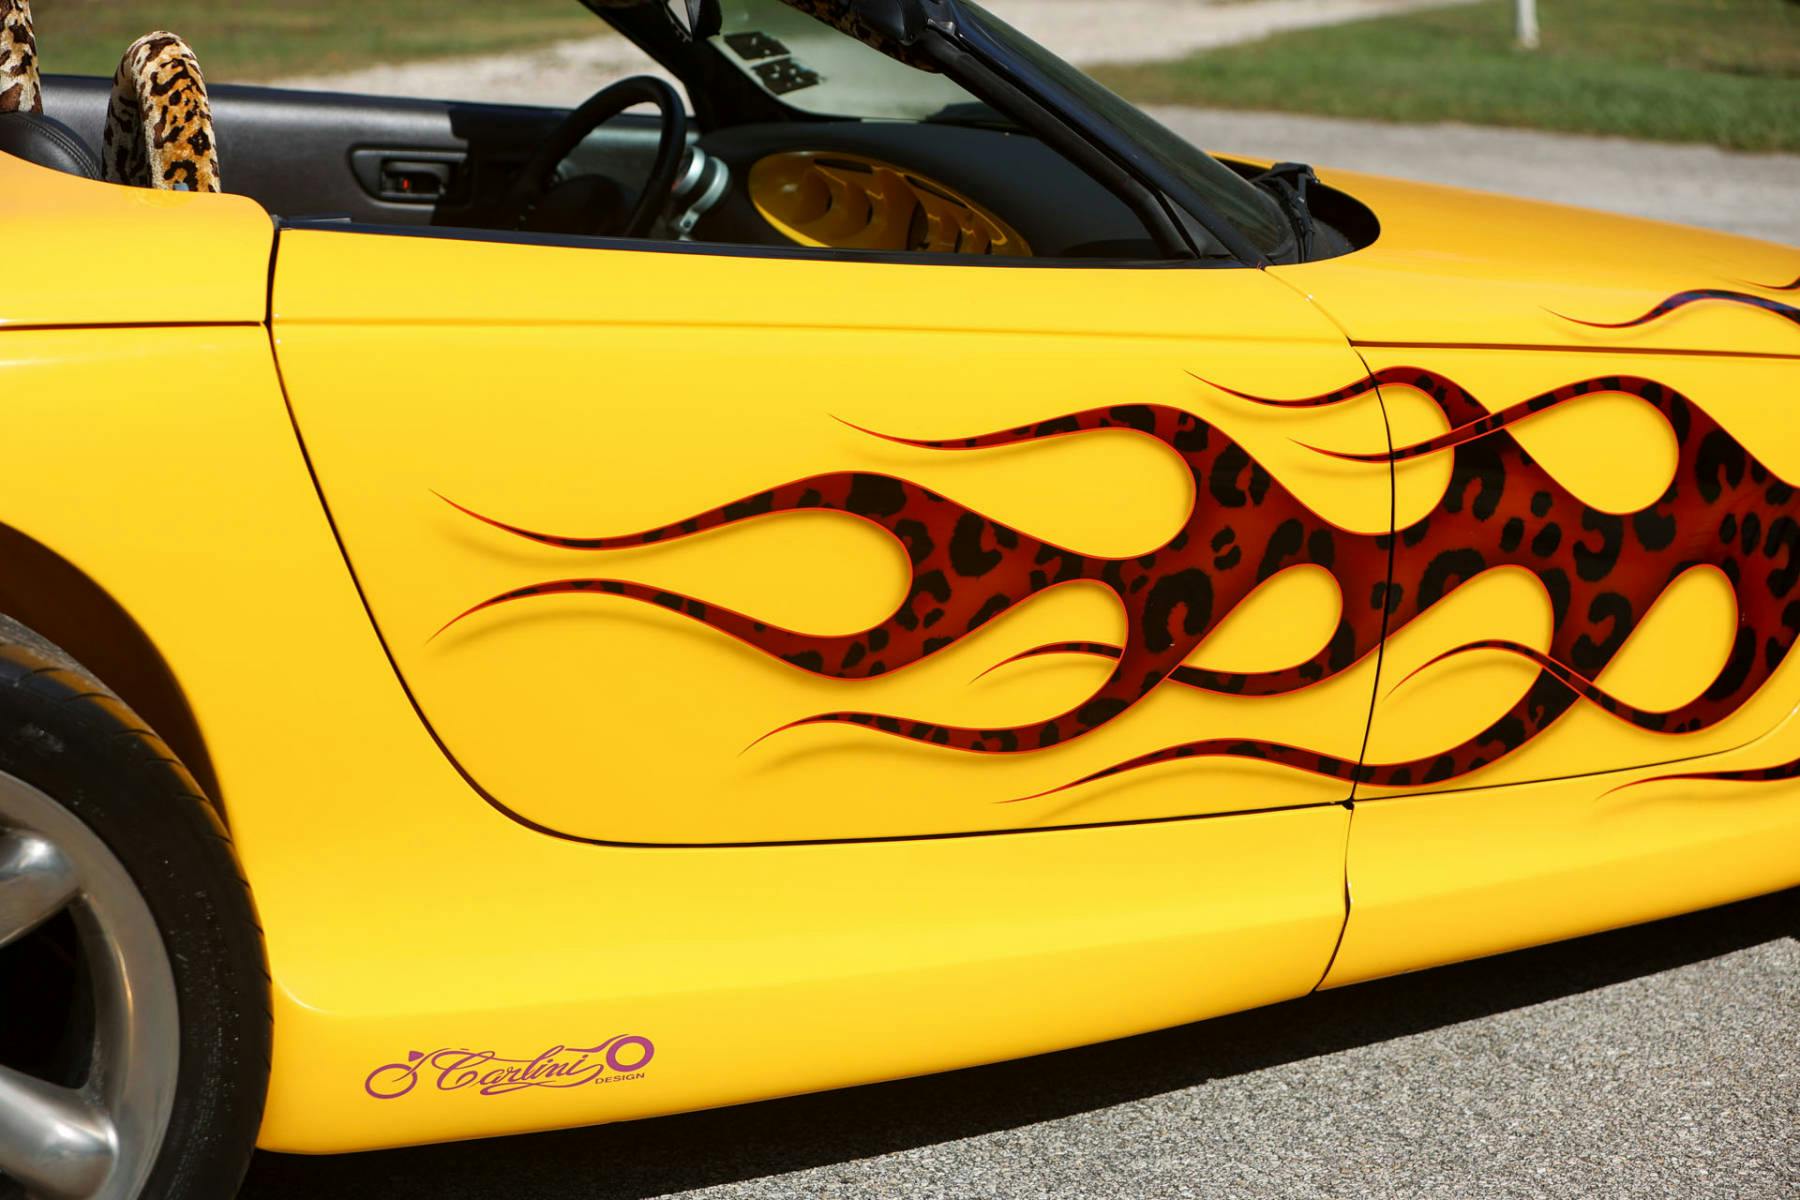 1999 Plymouth Prowler George Foreman exterior flame graphics detail